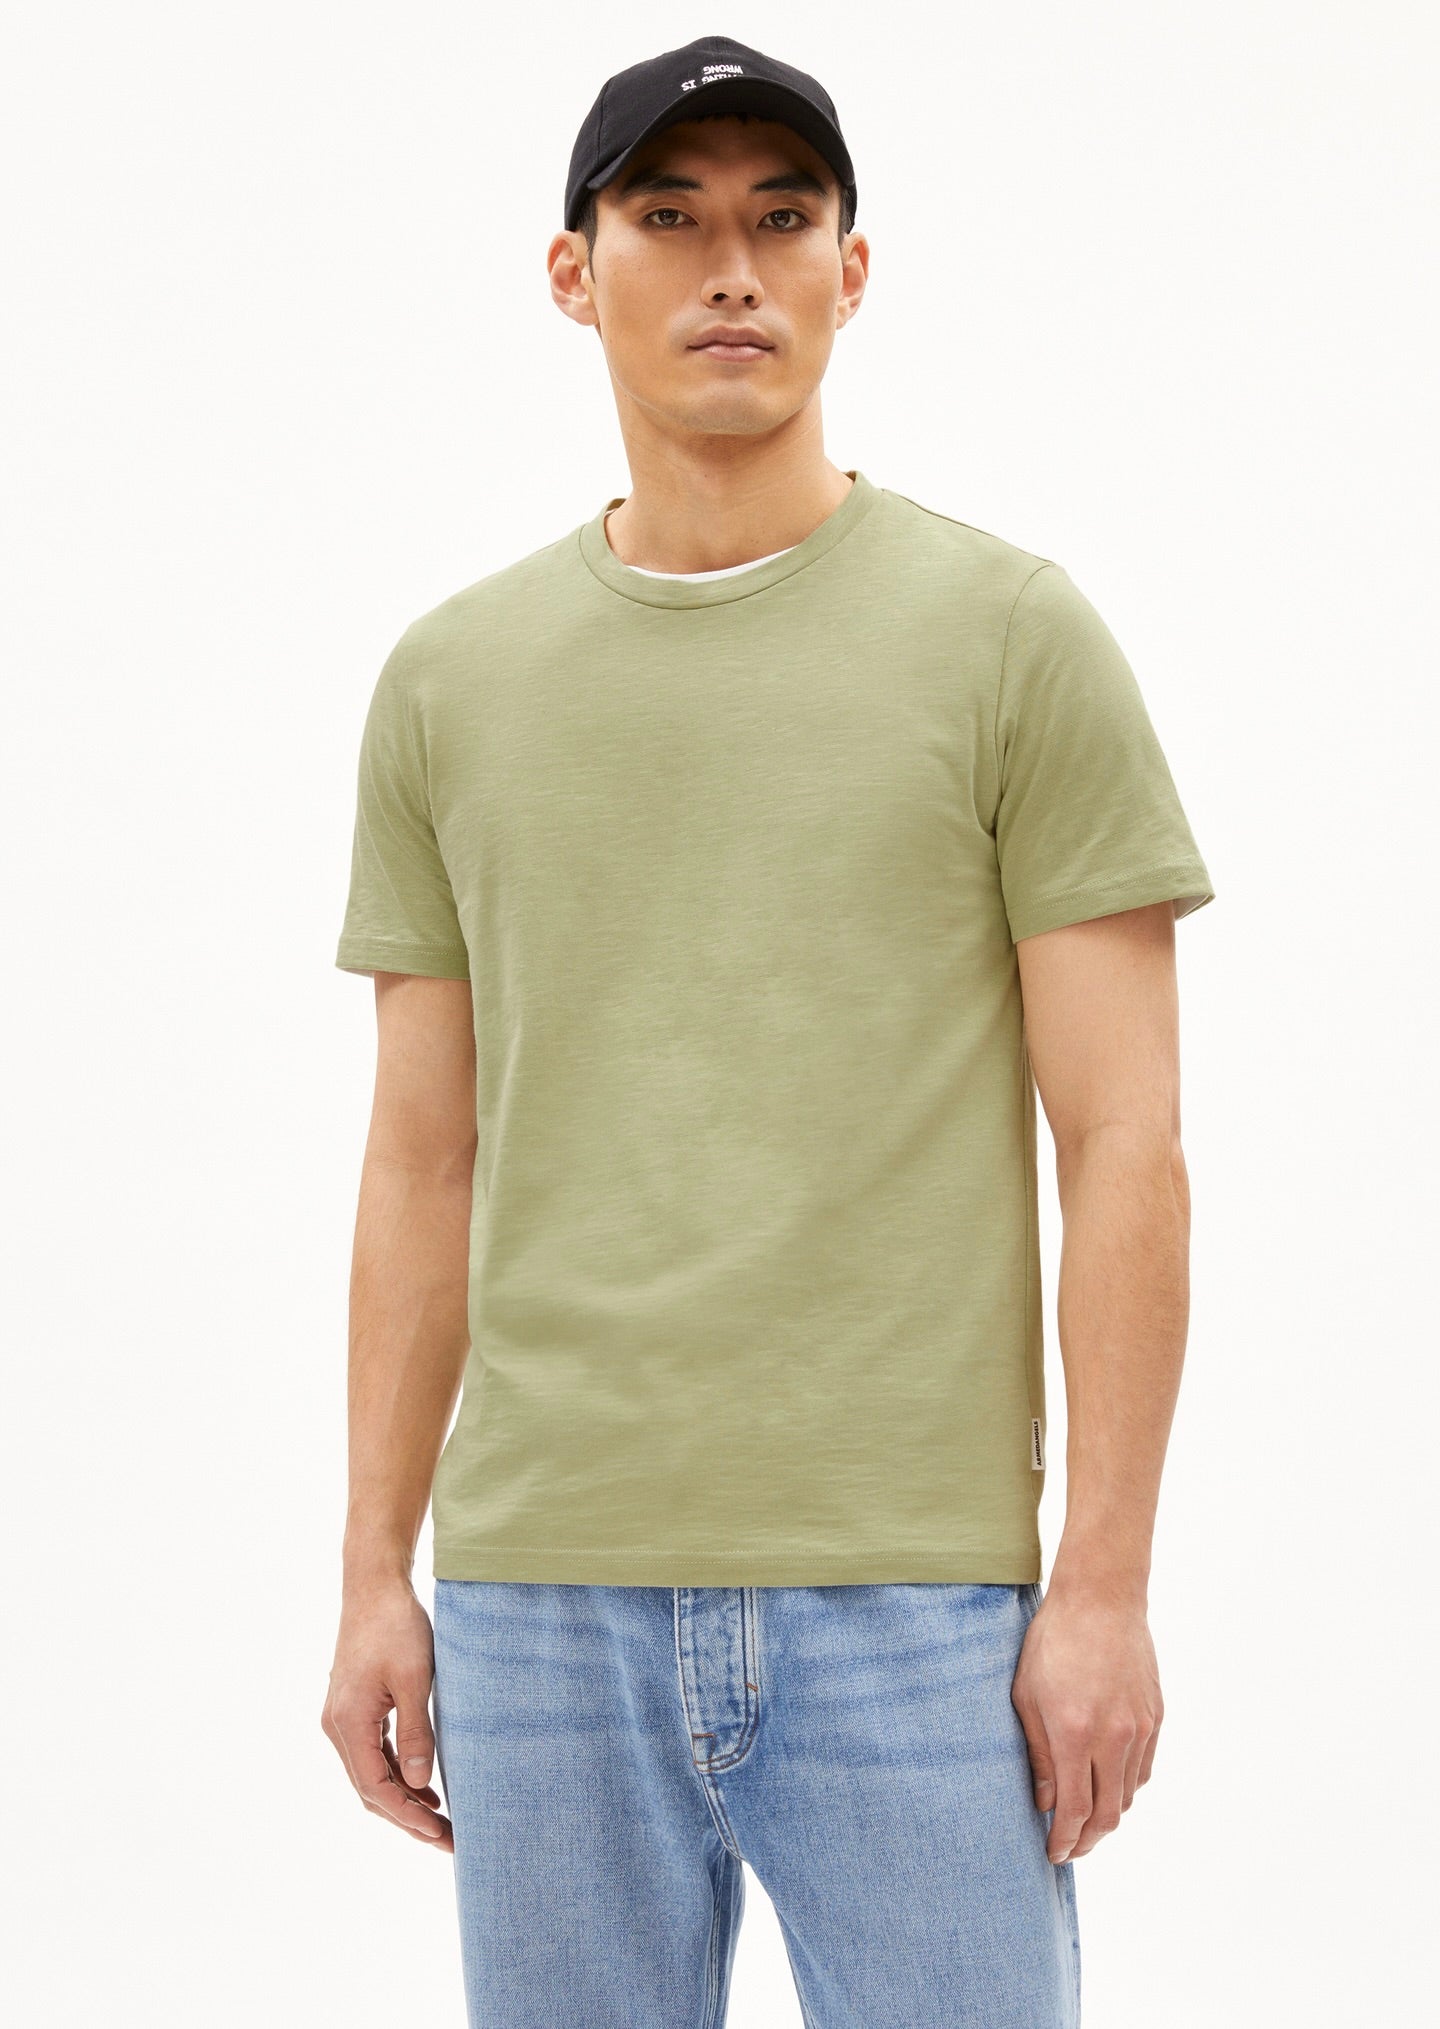 SS24 - ARMEDANGELS - Jaamel Structure T-Shirt in Light Matcha - on model front 1